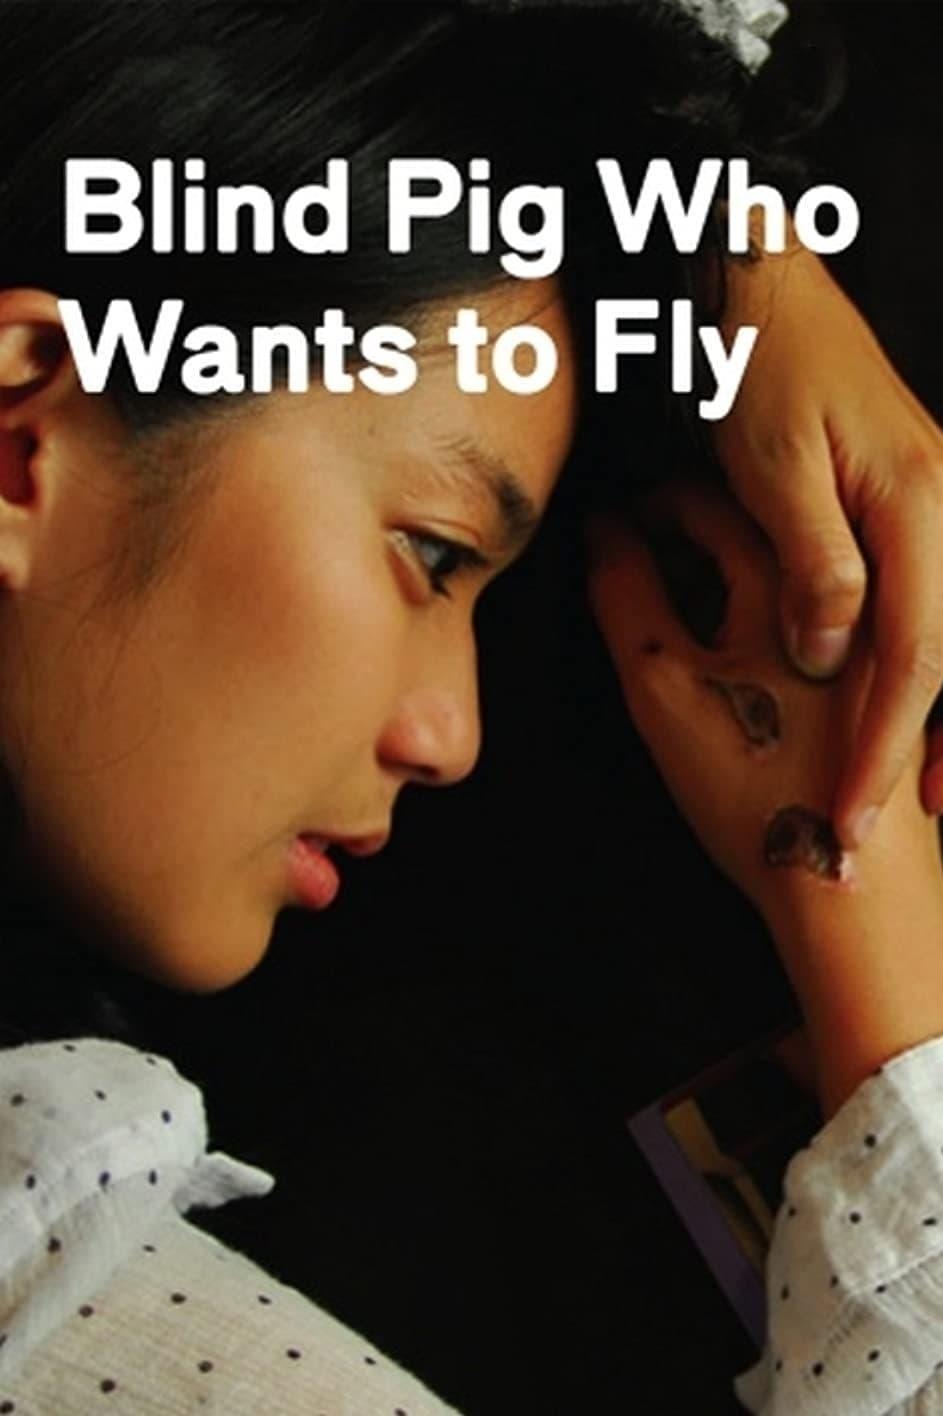 Blind Pig Who Wants to Fly poster